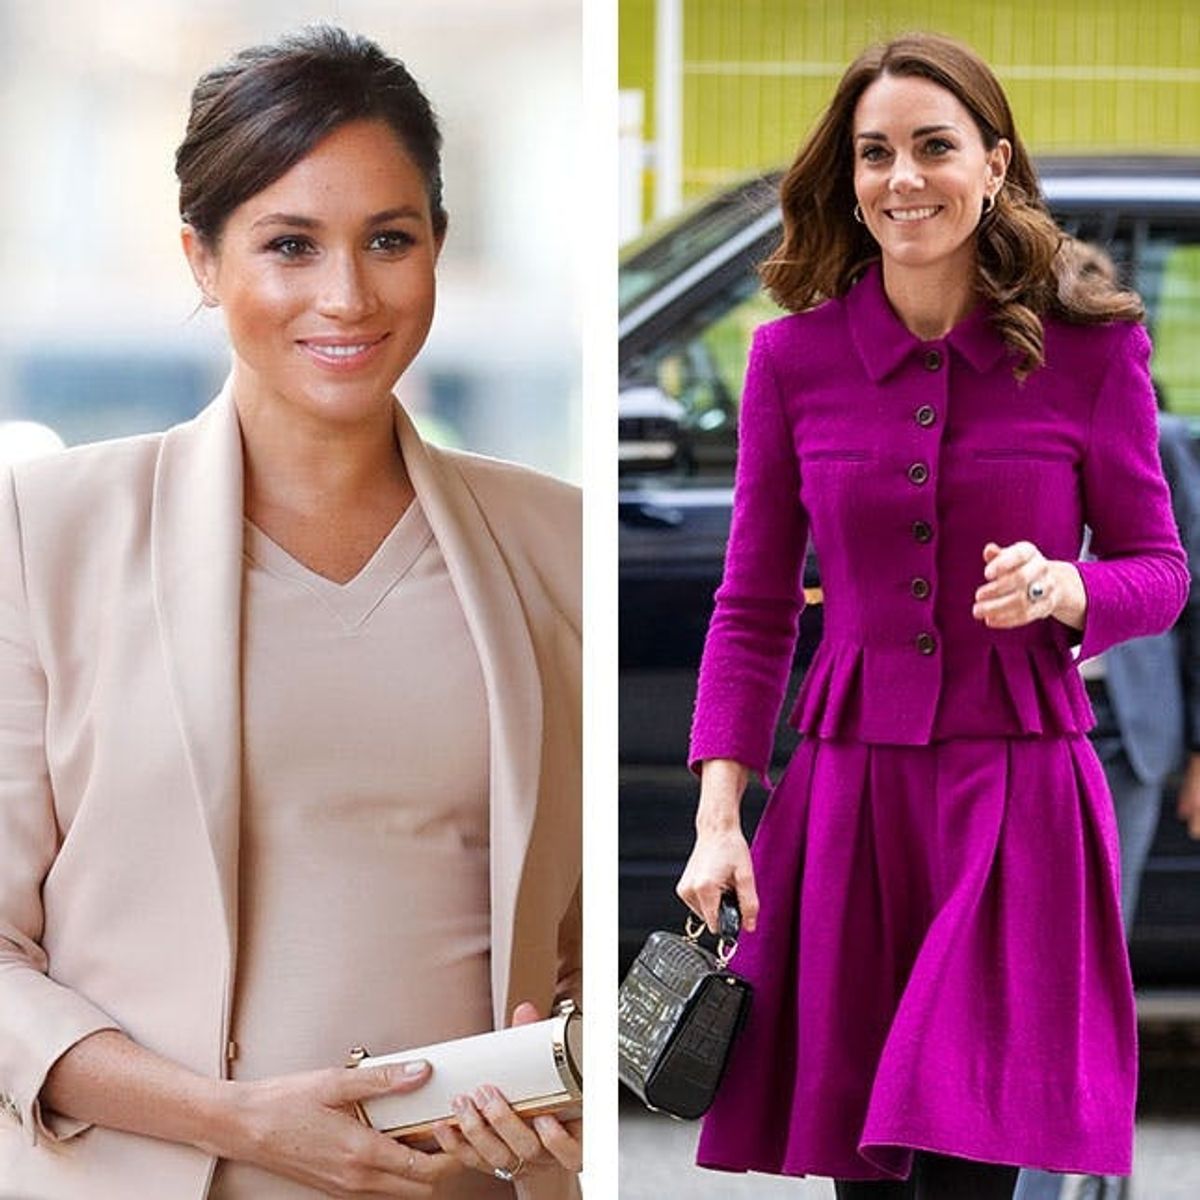 3 Bag Trends That Meghan Markle and Kate Middleton Swear By